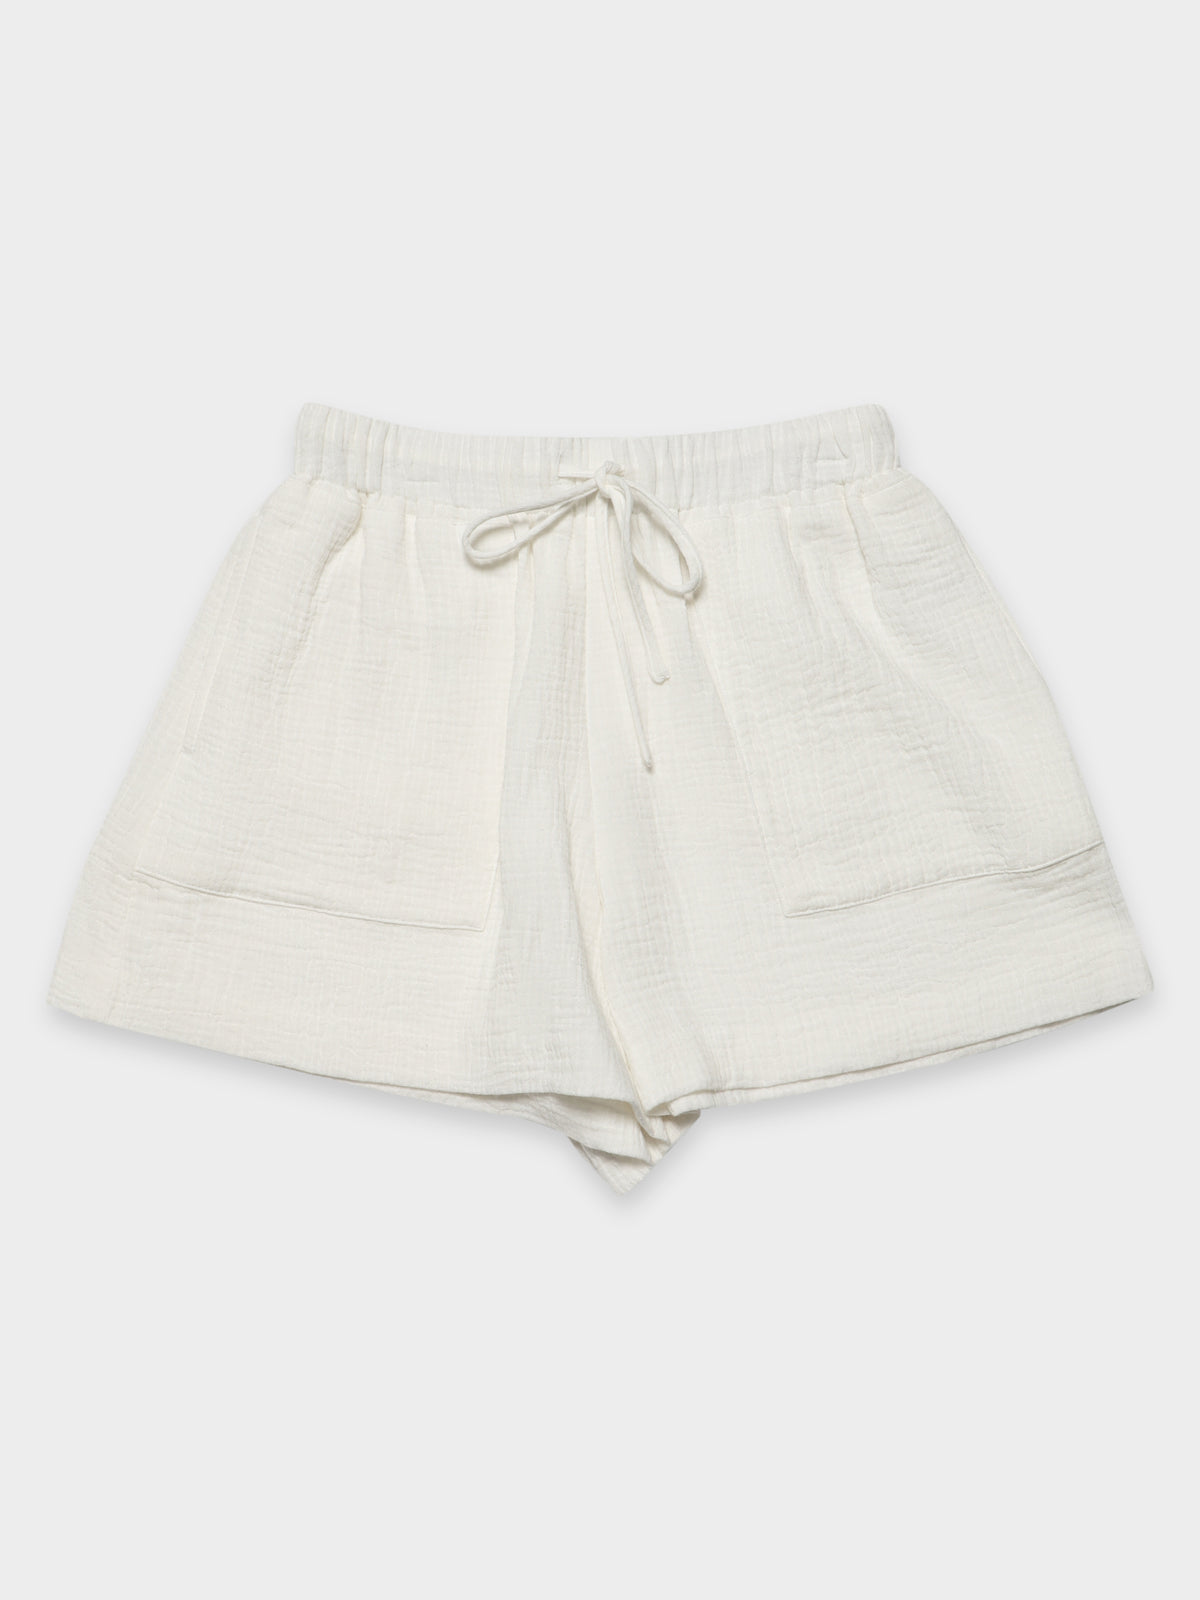 Avril Textured Shorts in White